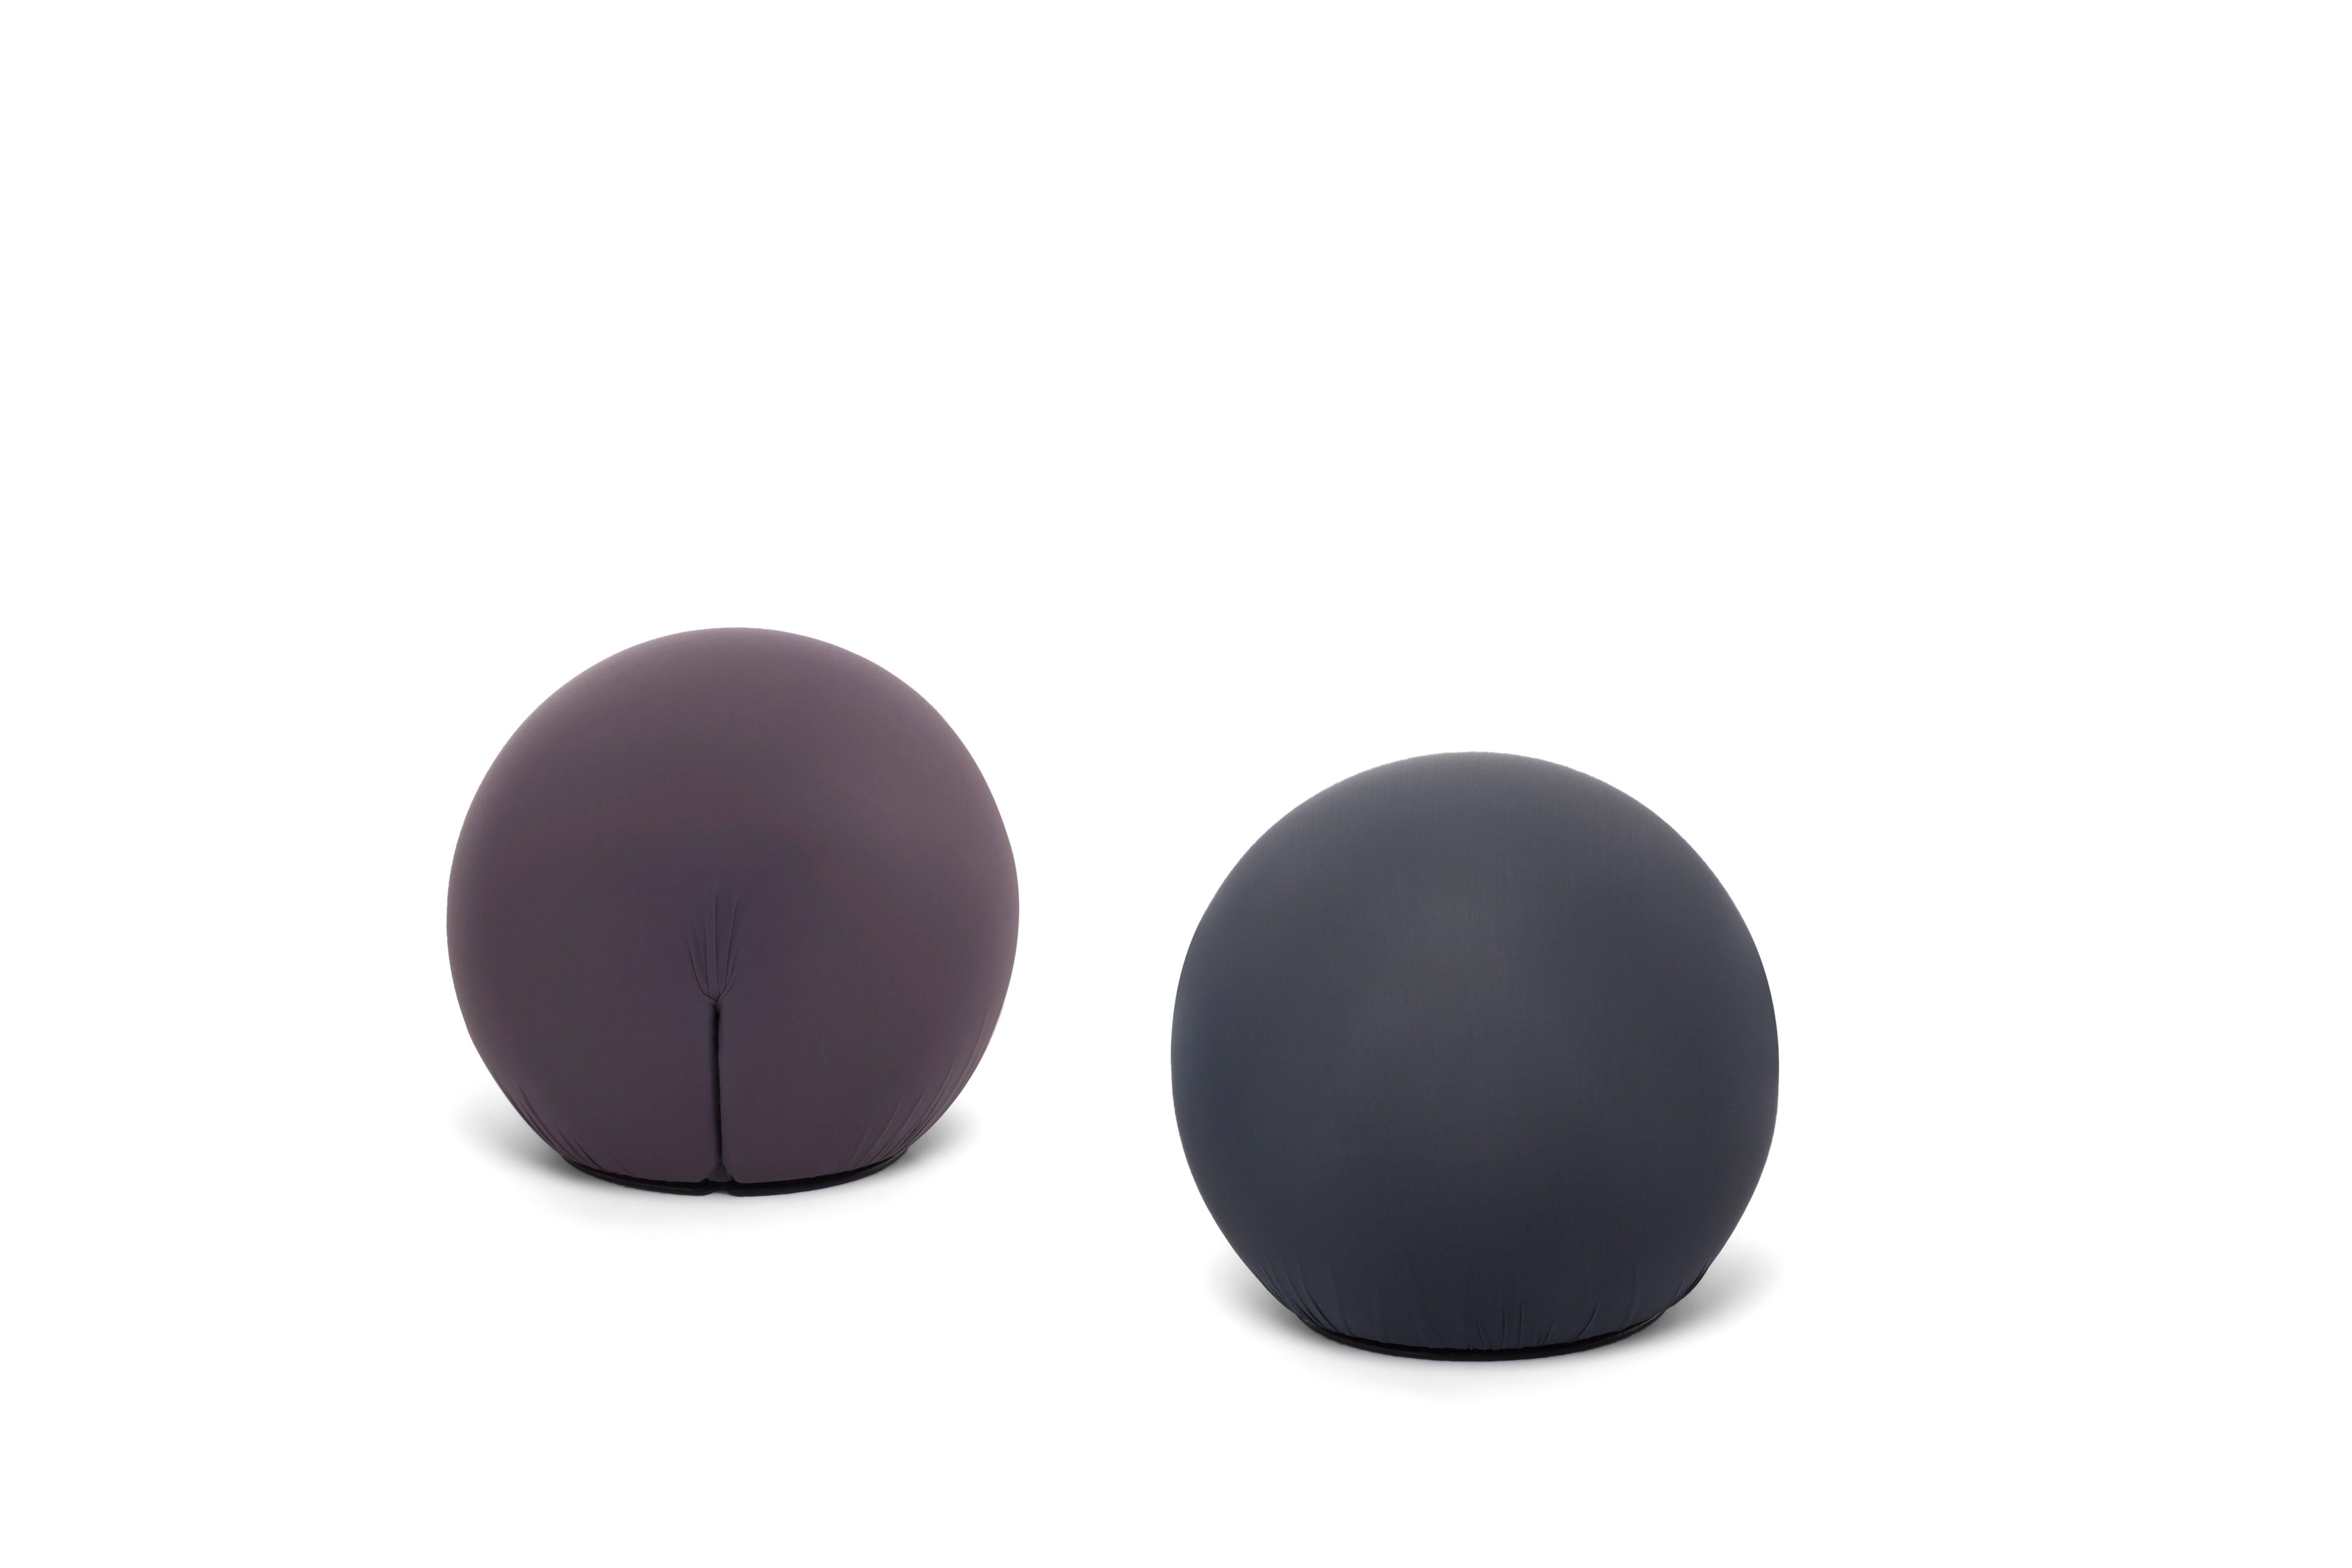 This family of minimalist objects, whose ancestor is Tato, emphasizes whatever is strongly visual and chromatic, without of course overlooking the functional. They are at their best in an informal house. You look at them with ease, you move them